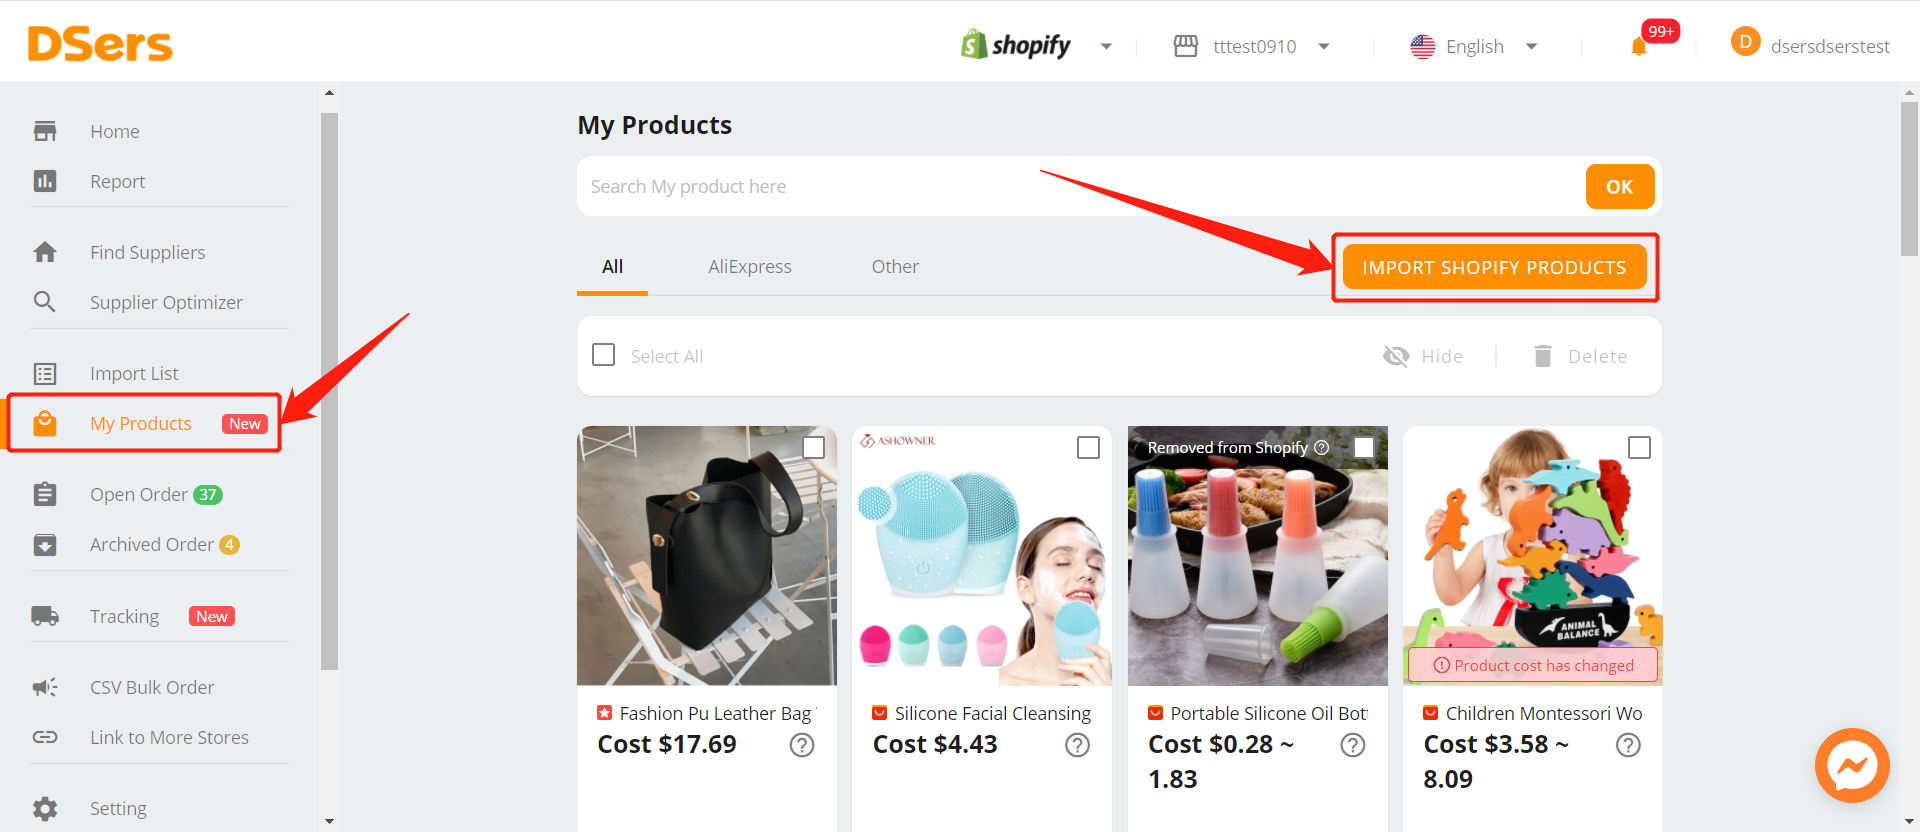 Import products from your Shopify store with Shopify DSers - Import Shopify Products - Shopify DSers